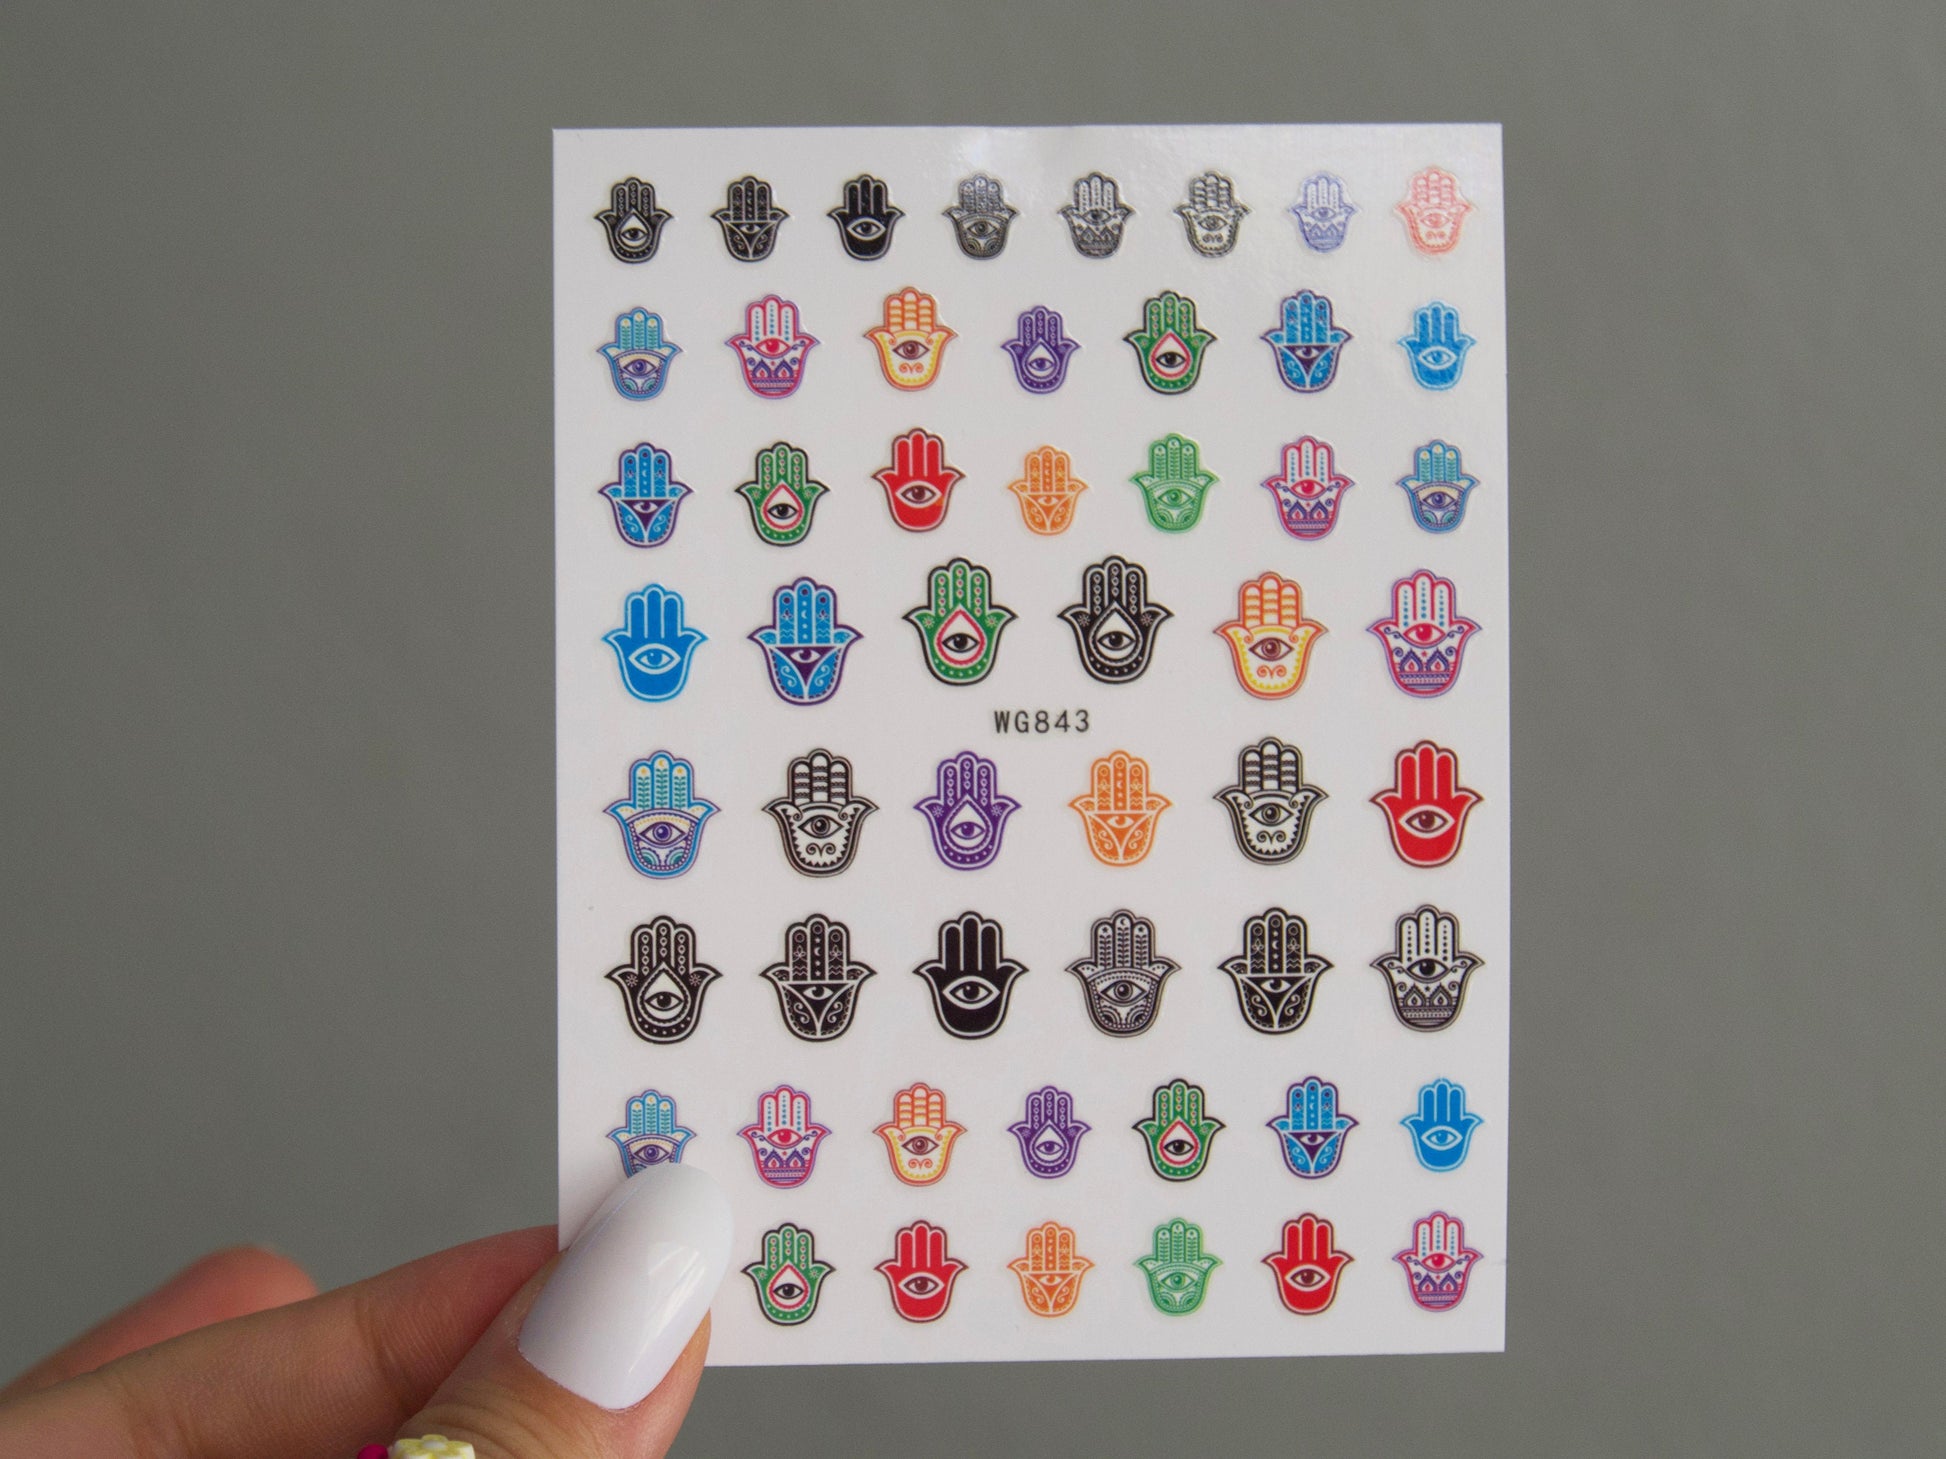 Evil eye nail sticker/ Peel off nail art stickers supply/ Blue supernatural belief The hamsa amulet nail deco easy to apply